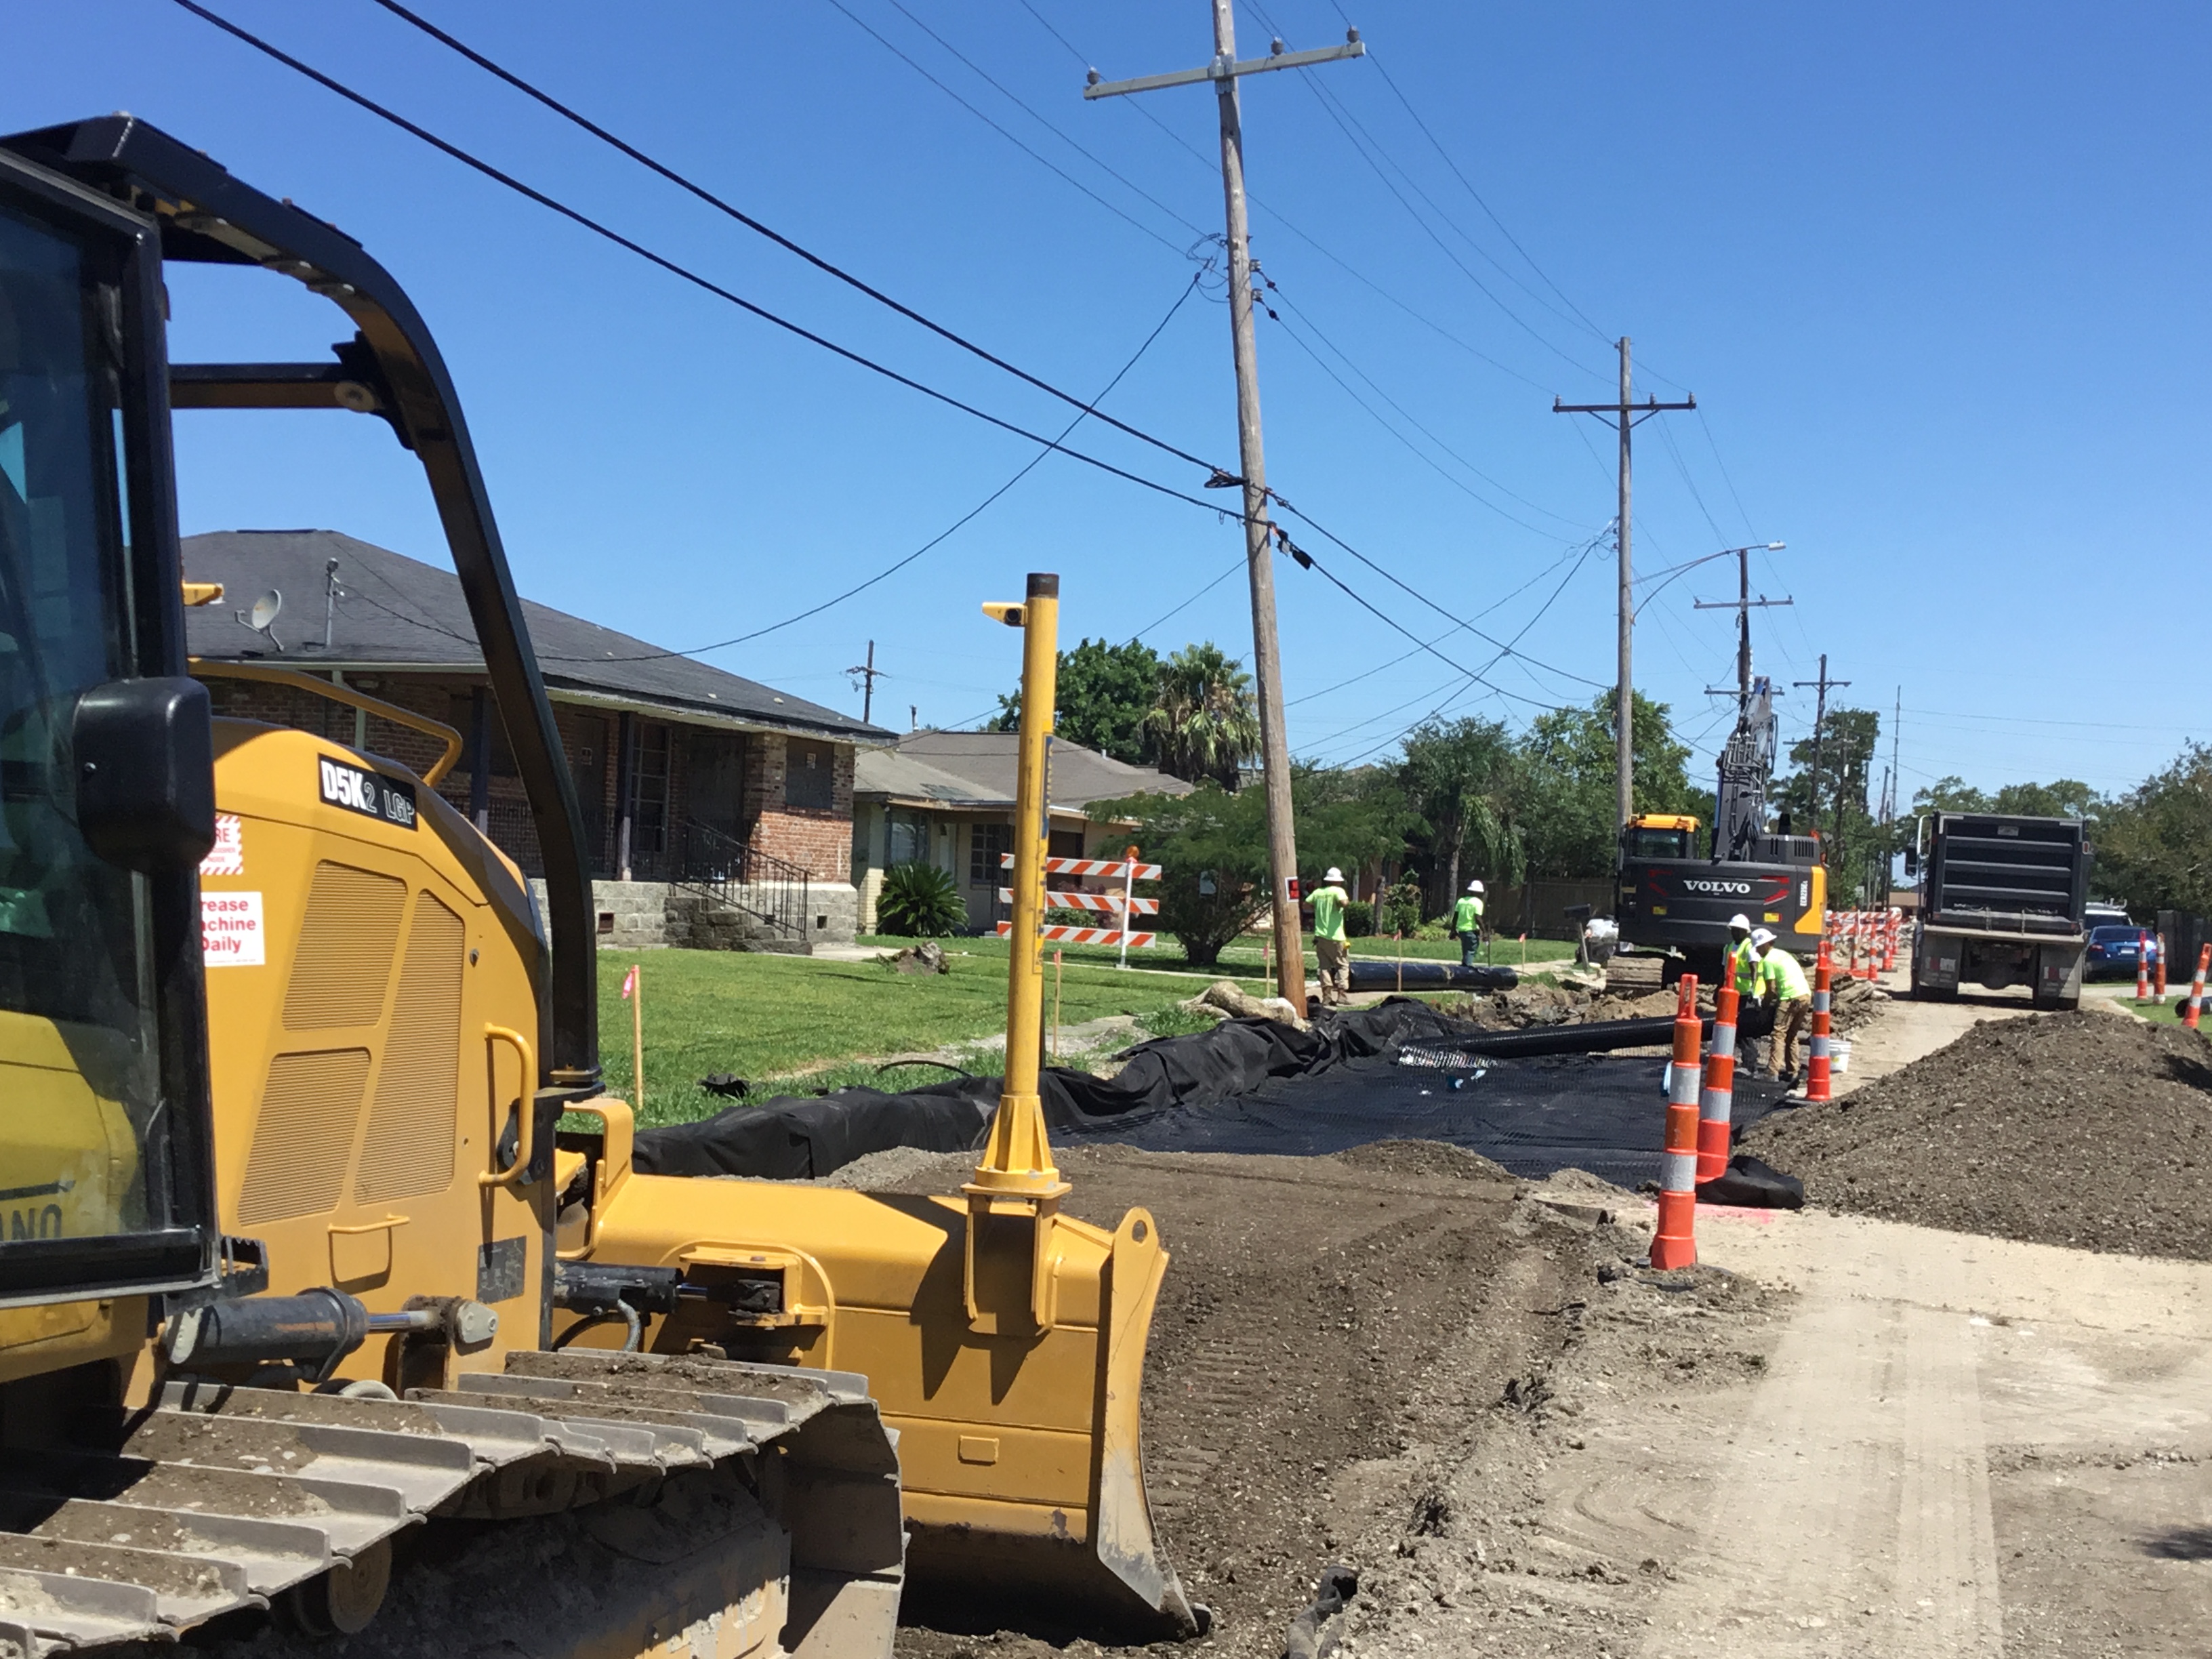 WATERLINE REPAIR AND REPLACEMENT UNDERWAY ON READ EAST C PROJECT